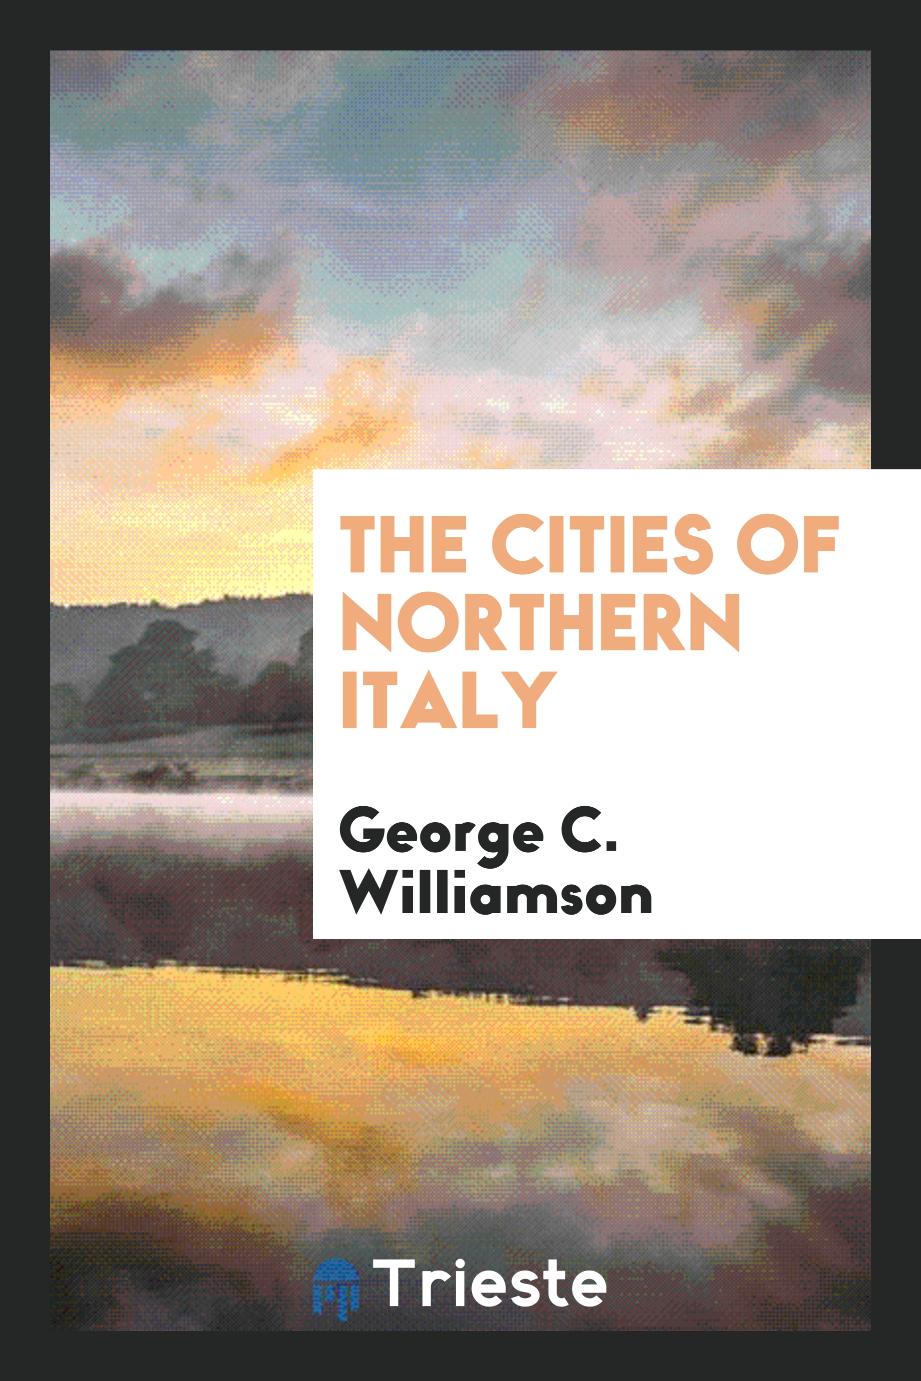 The cities of northern Italy